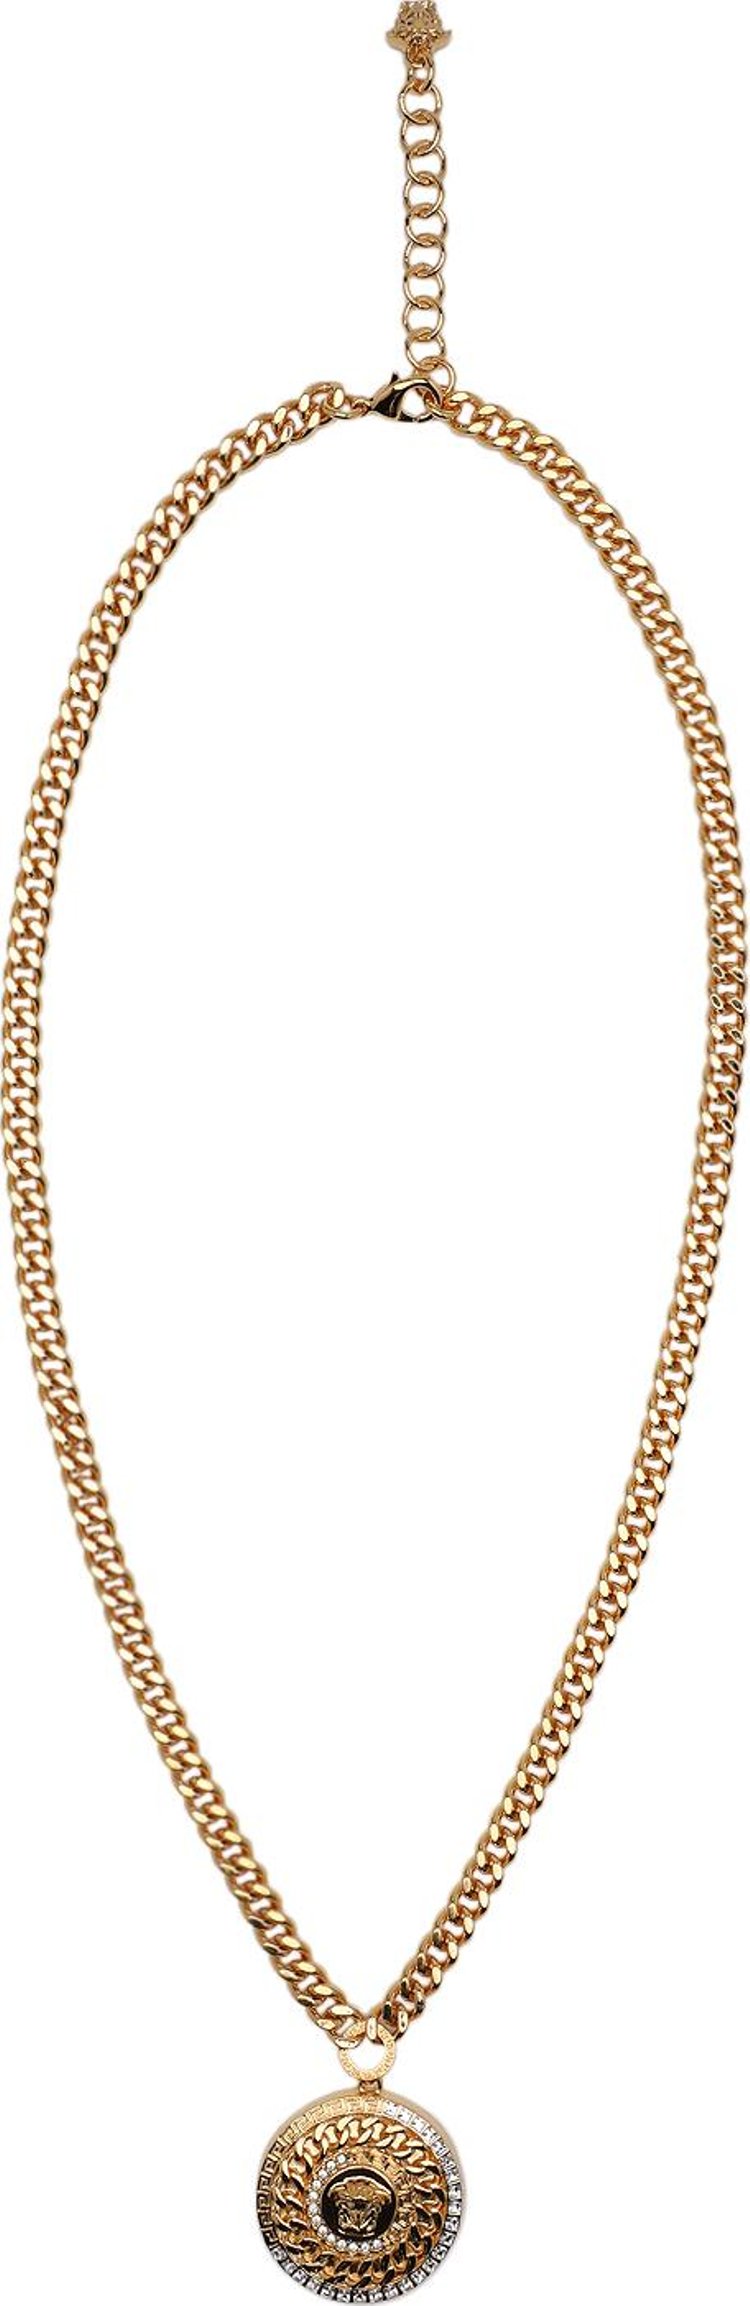 Versace Chained Medusa Necklace 'Gold'